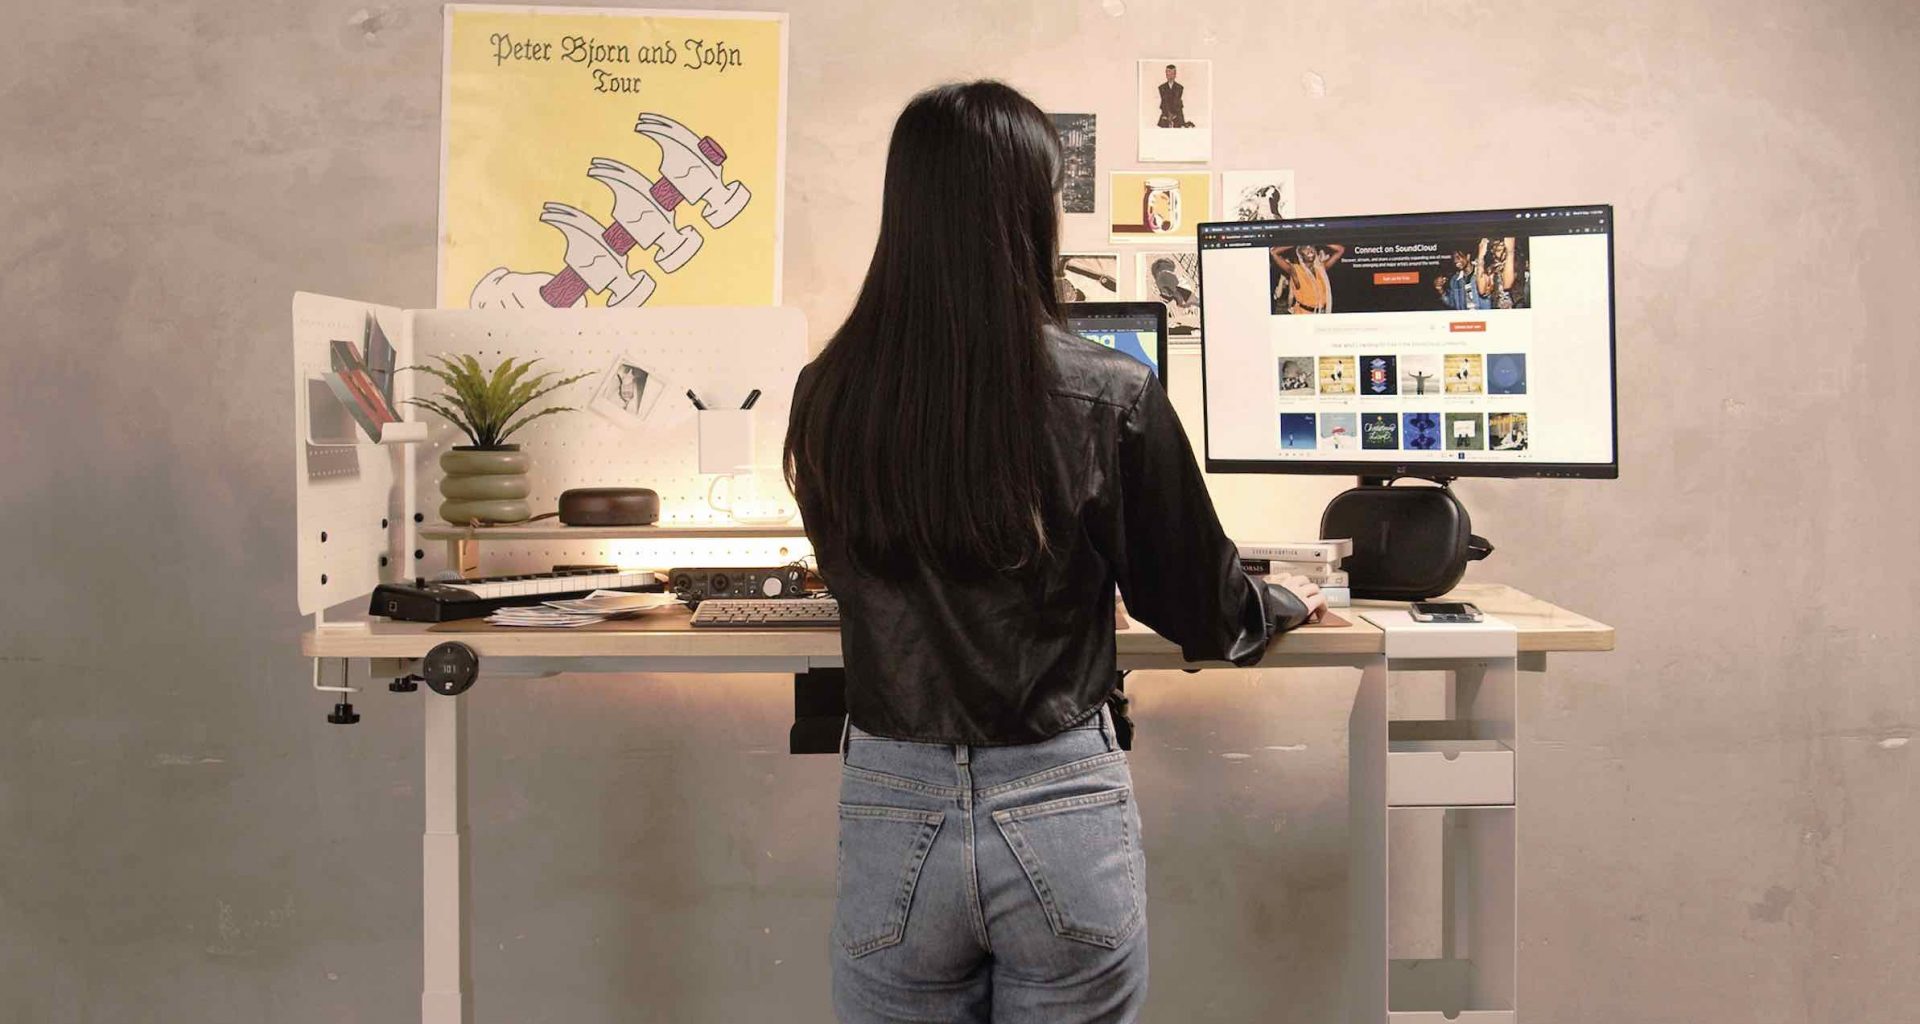 [#SupportLocal] Create your dream WFH setup with EverDesk+ Customisable Smart Standing Desks - From the Creators of ErgoTune Ergonomic Work Chair - Alvinology